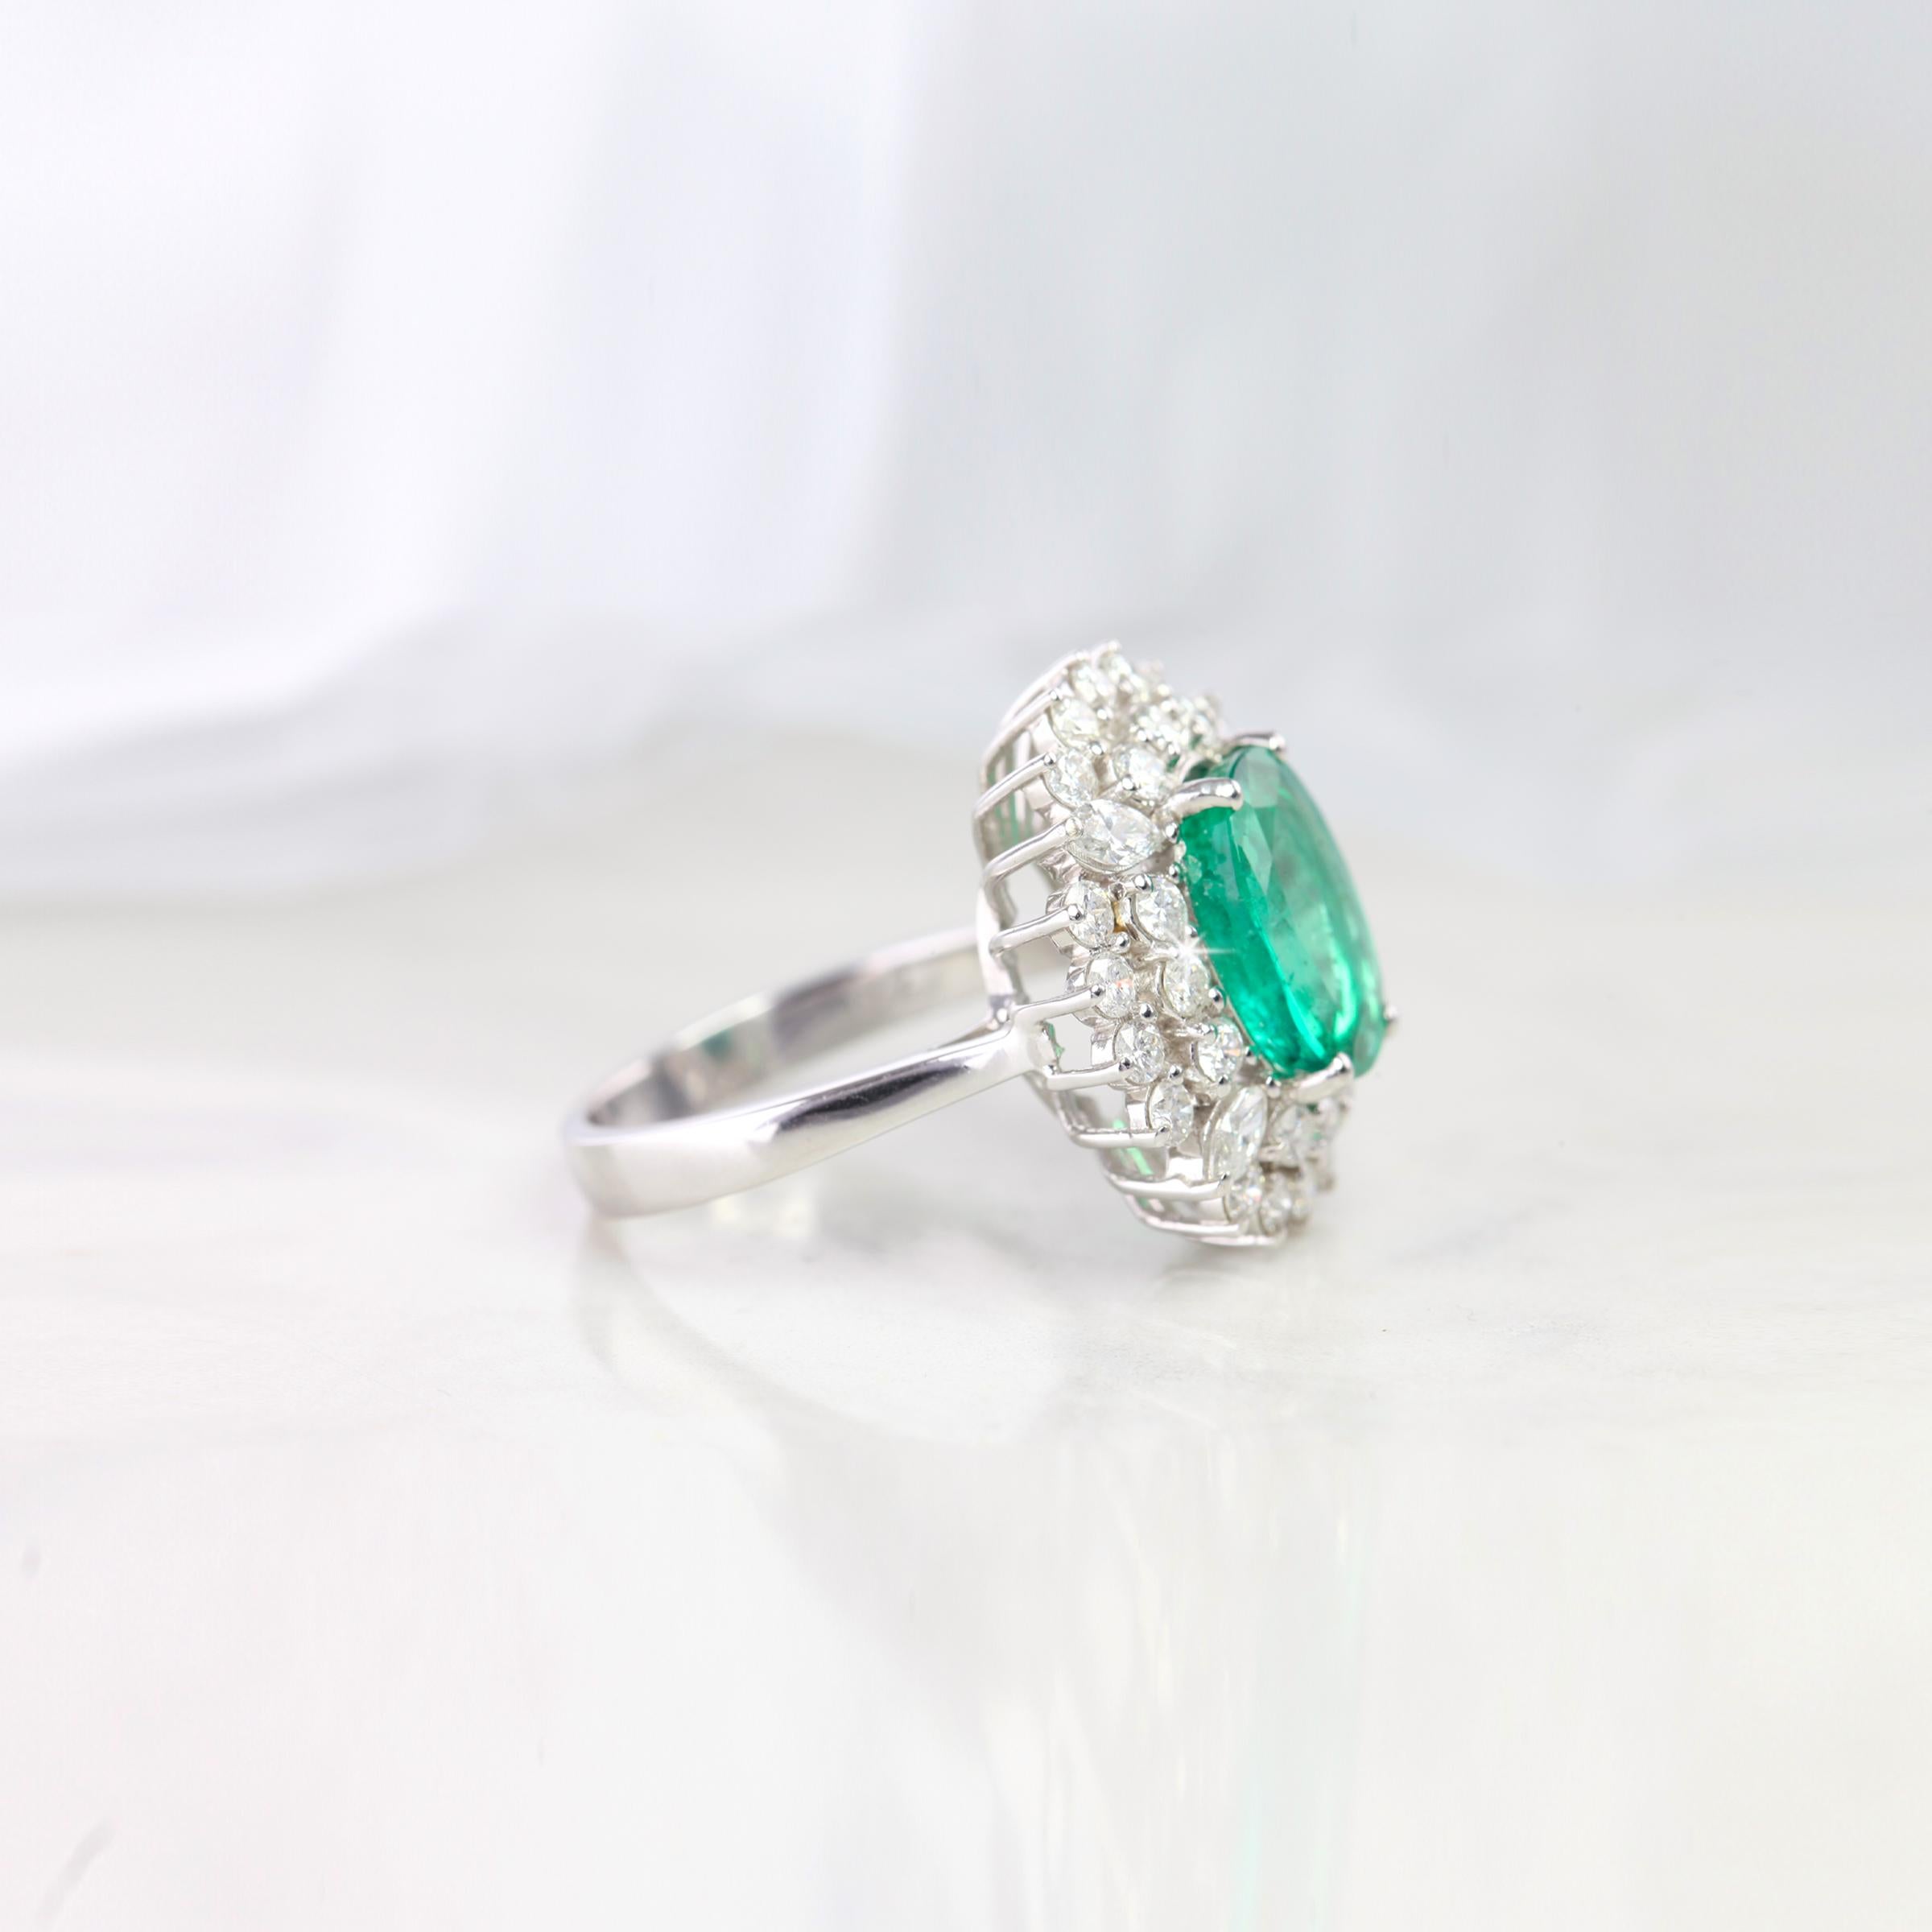 Emerald Entourage Ring, Zambian Emerald With Diamond Ring ,Fine Jewellry Engagement Ring created by hands from ring to the stone shapes. 

I used brillant diamonds to reveal oval cut emerald. I completed these in 18K solid excelent white gold ring.